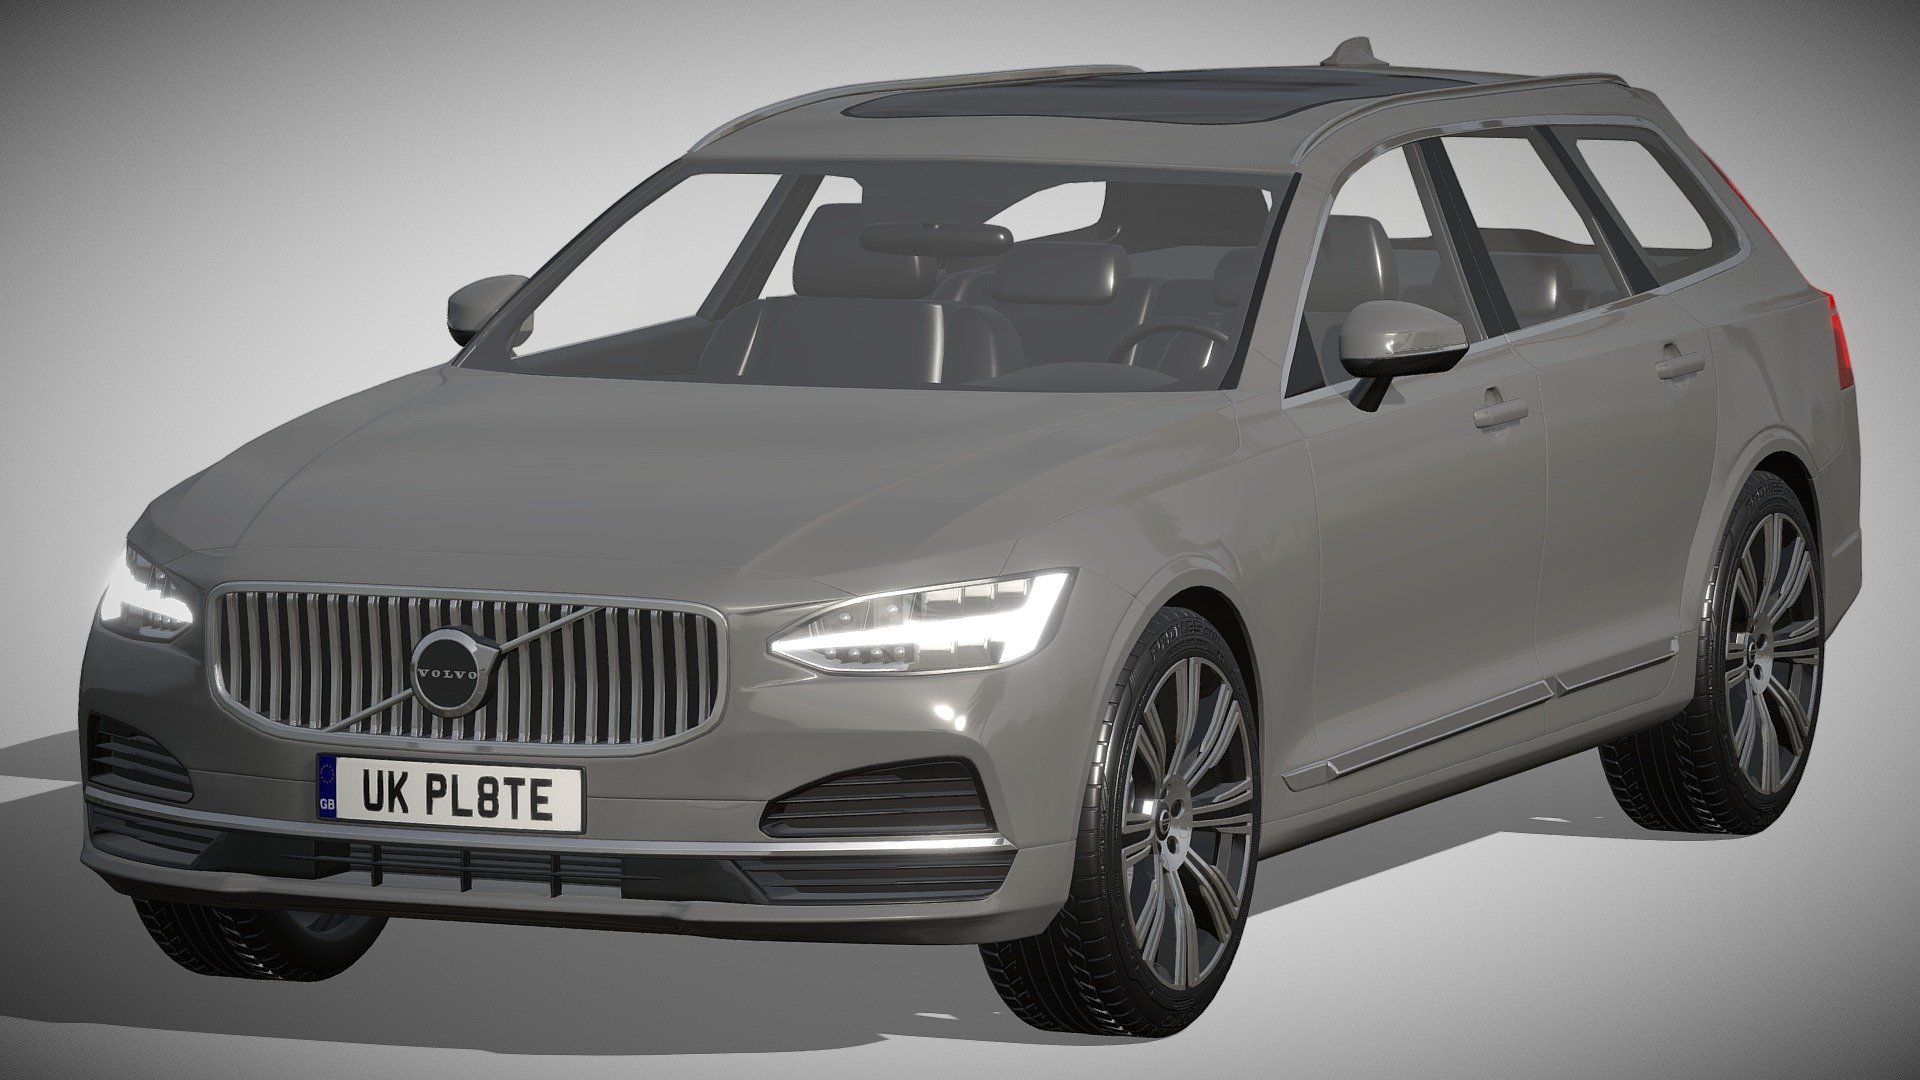 Volvo V90

https://www.volvocars.com/uk/v/cars/v90

Clean geometry Light weight model, yet completely detailed for HI-Res renders. Use for movies, Advertisements or games

Corona render and materials

All textures include in *.rar files

Lighting setup is not included in the file! - Volvo V90 - Buy Royalty Free 3D model by zifir3d 3d model